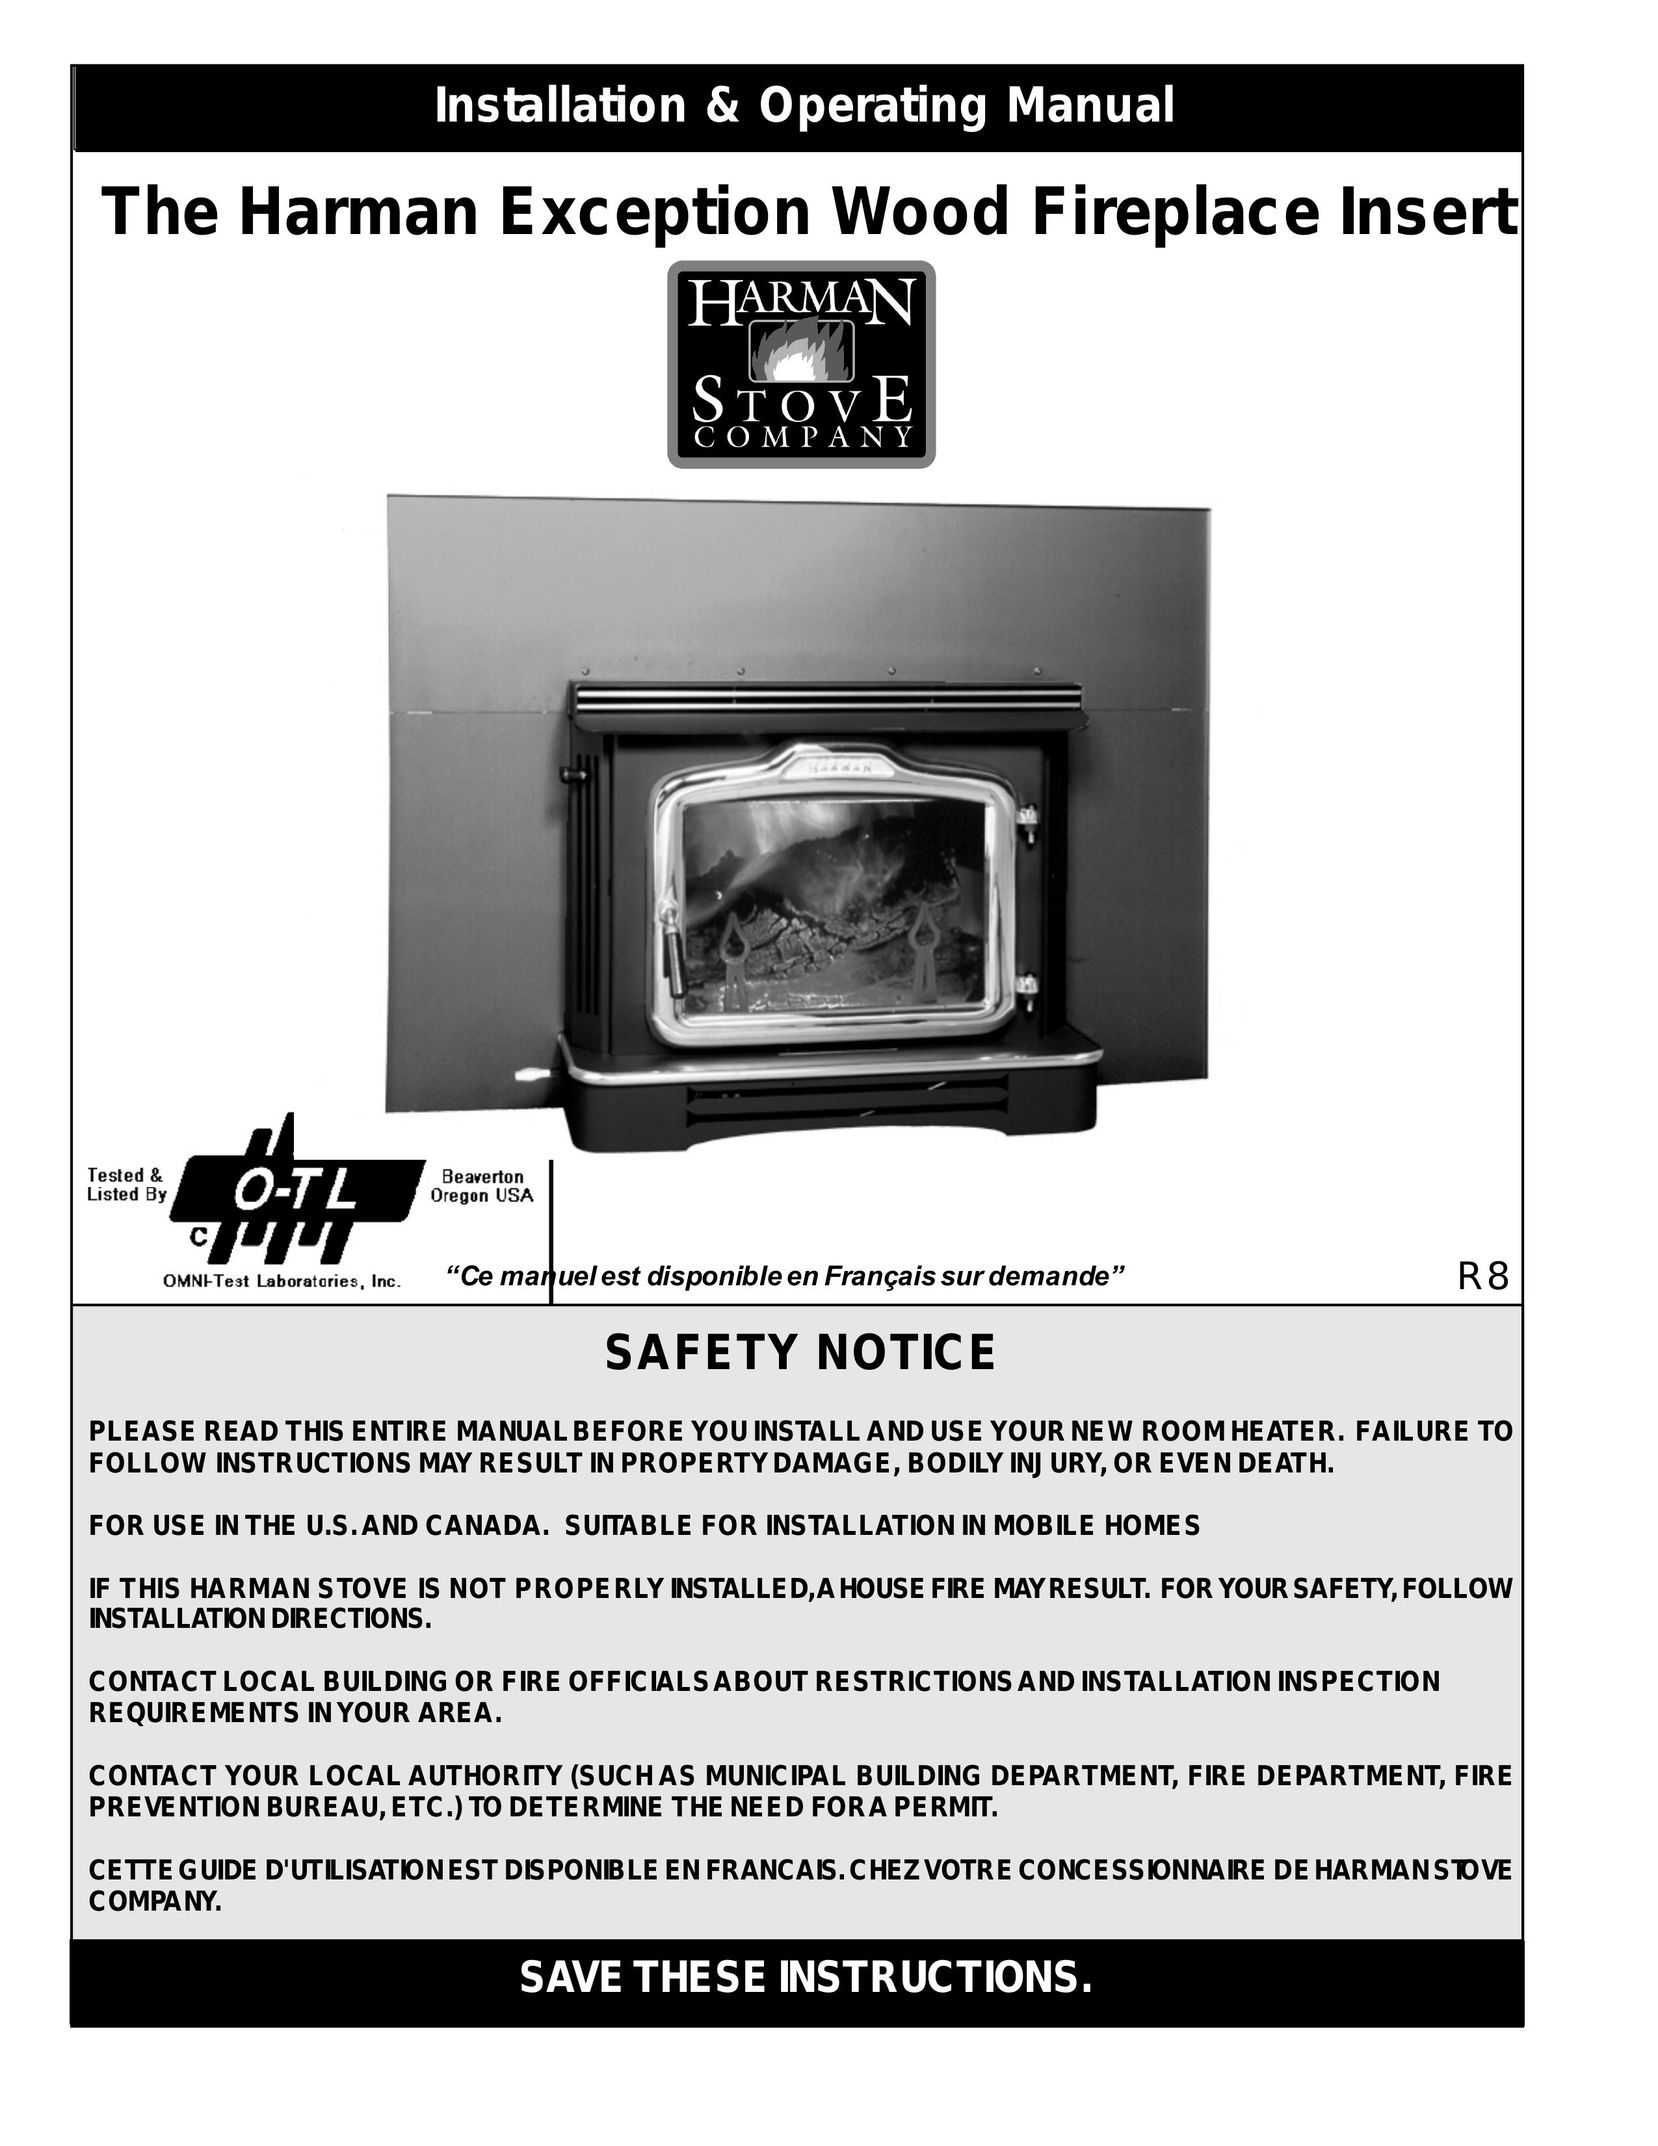 Harman Stove Company R7R1 Exception Wood Fireplace Indoor Fireplace User Manual